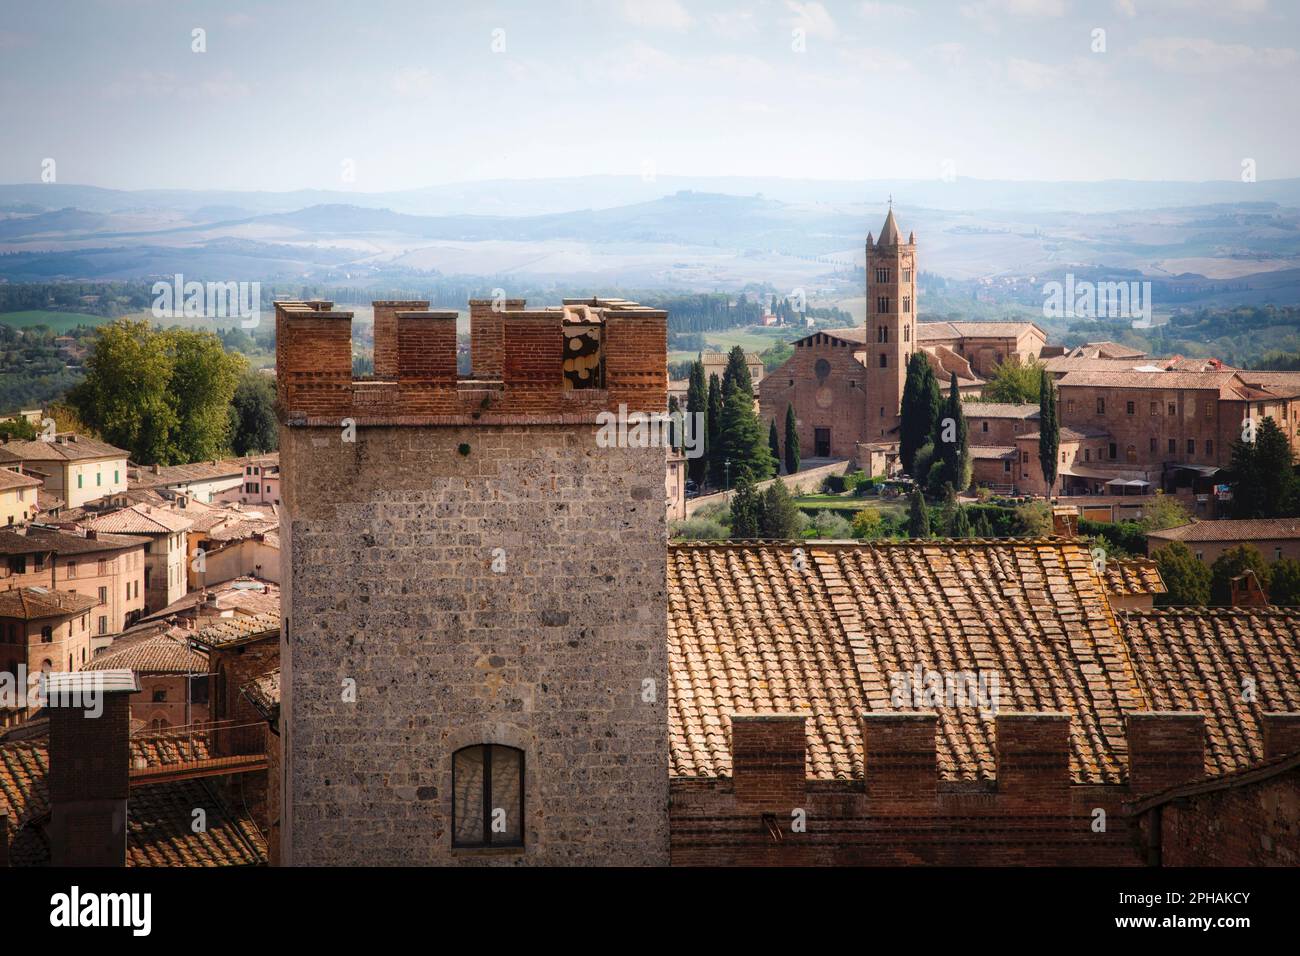 The skyline of Siena, Italy and beyond. Stock Photo